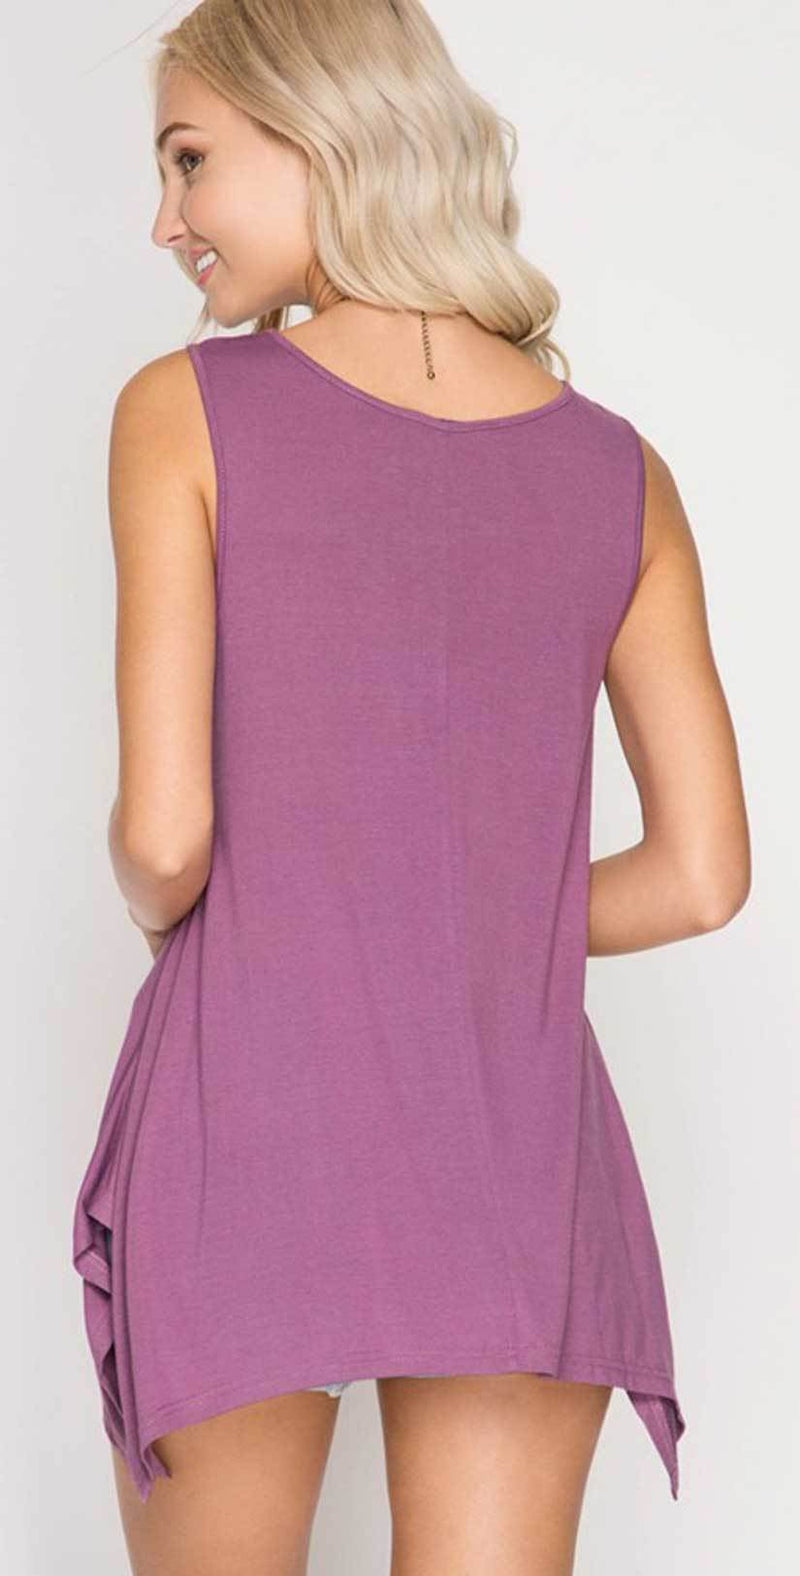 She + Sky Sleeveless Top with Braided Cutout Detail SL5262: